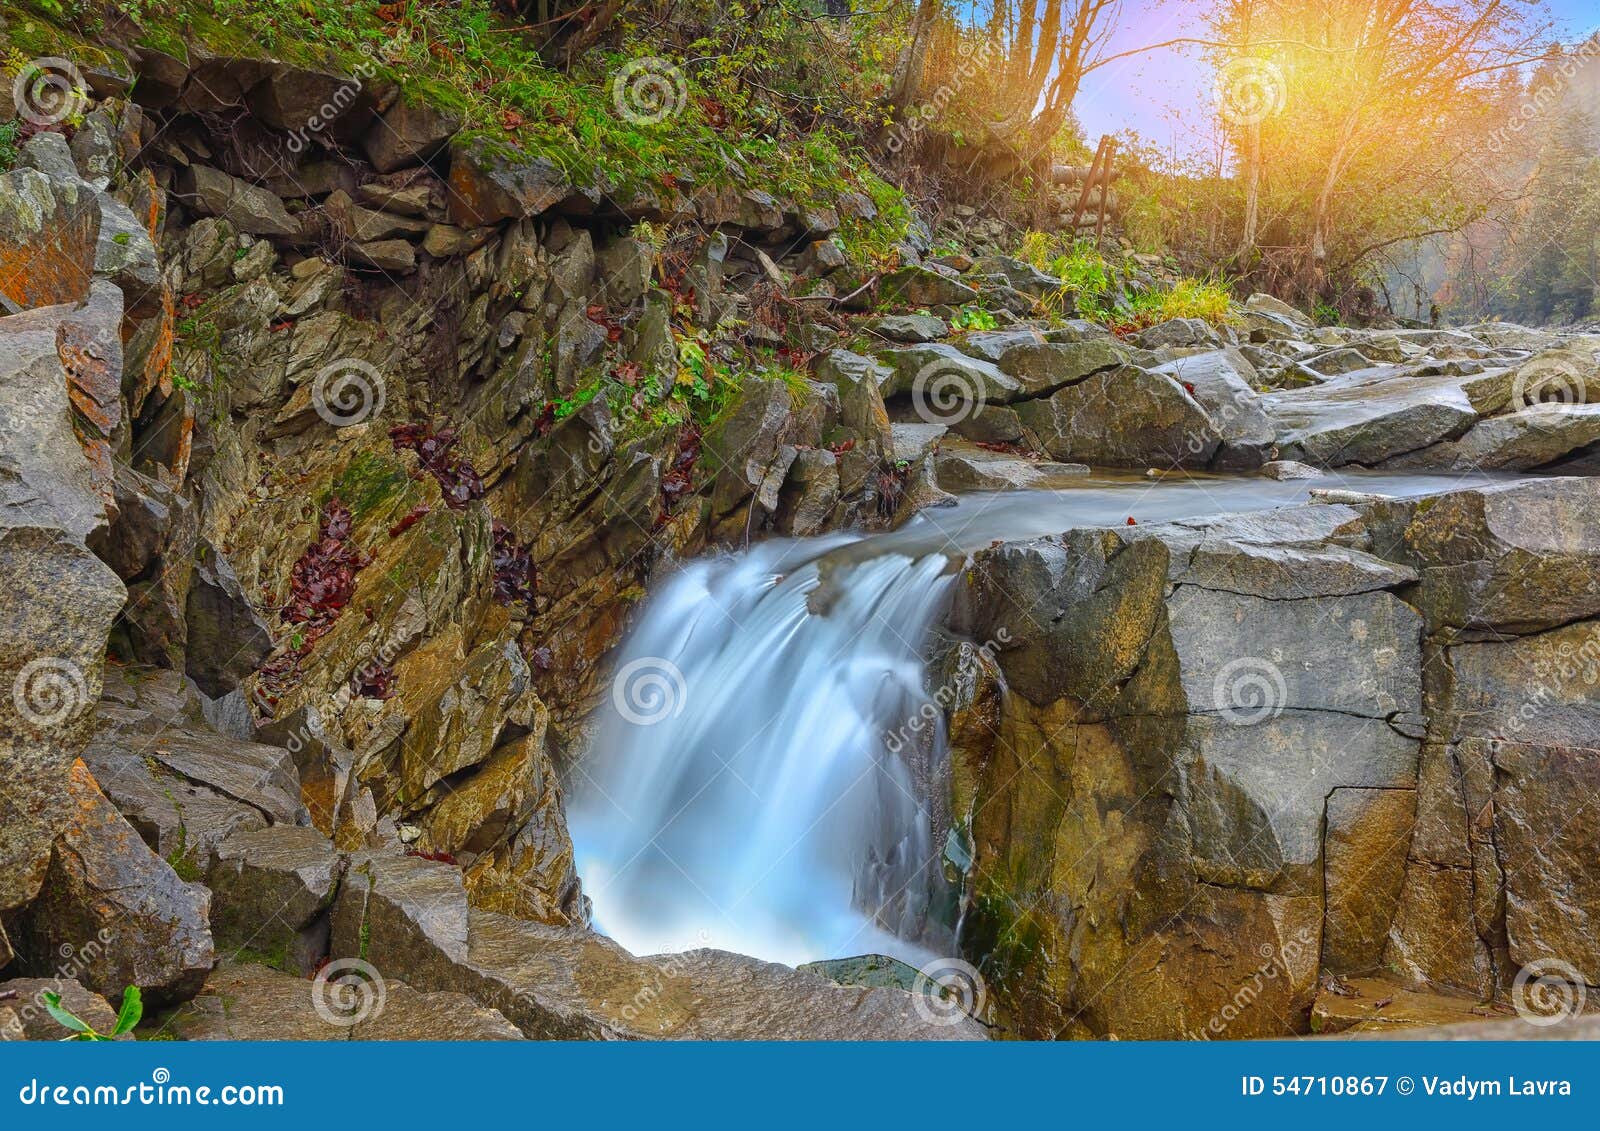 Mountain River in Autumn at Sunset Stock Image - Image of green ...